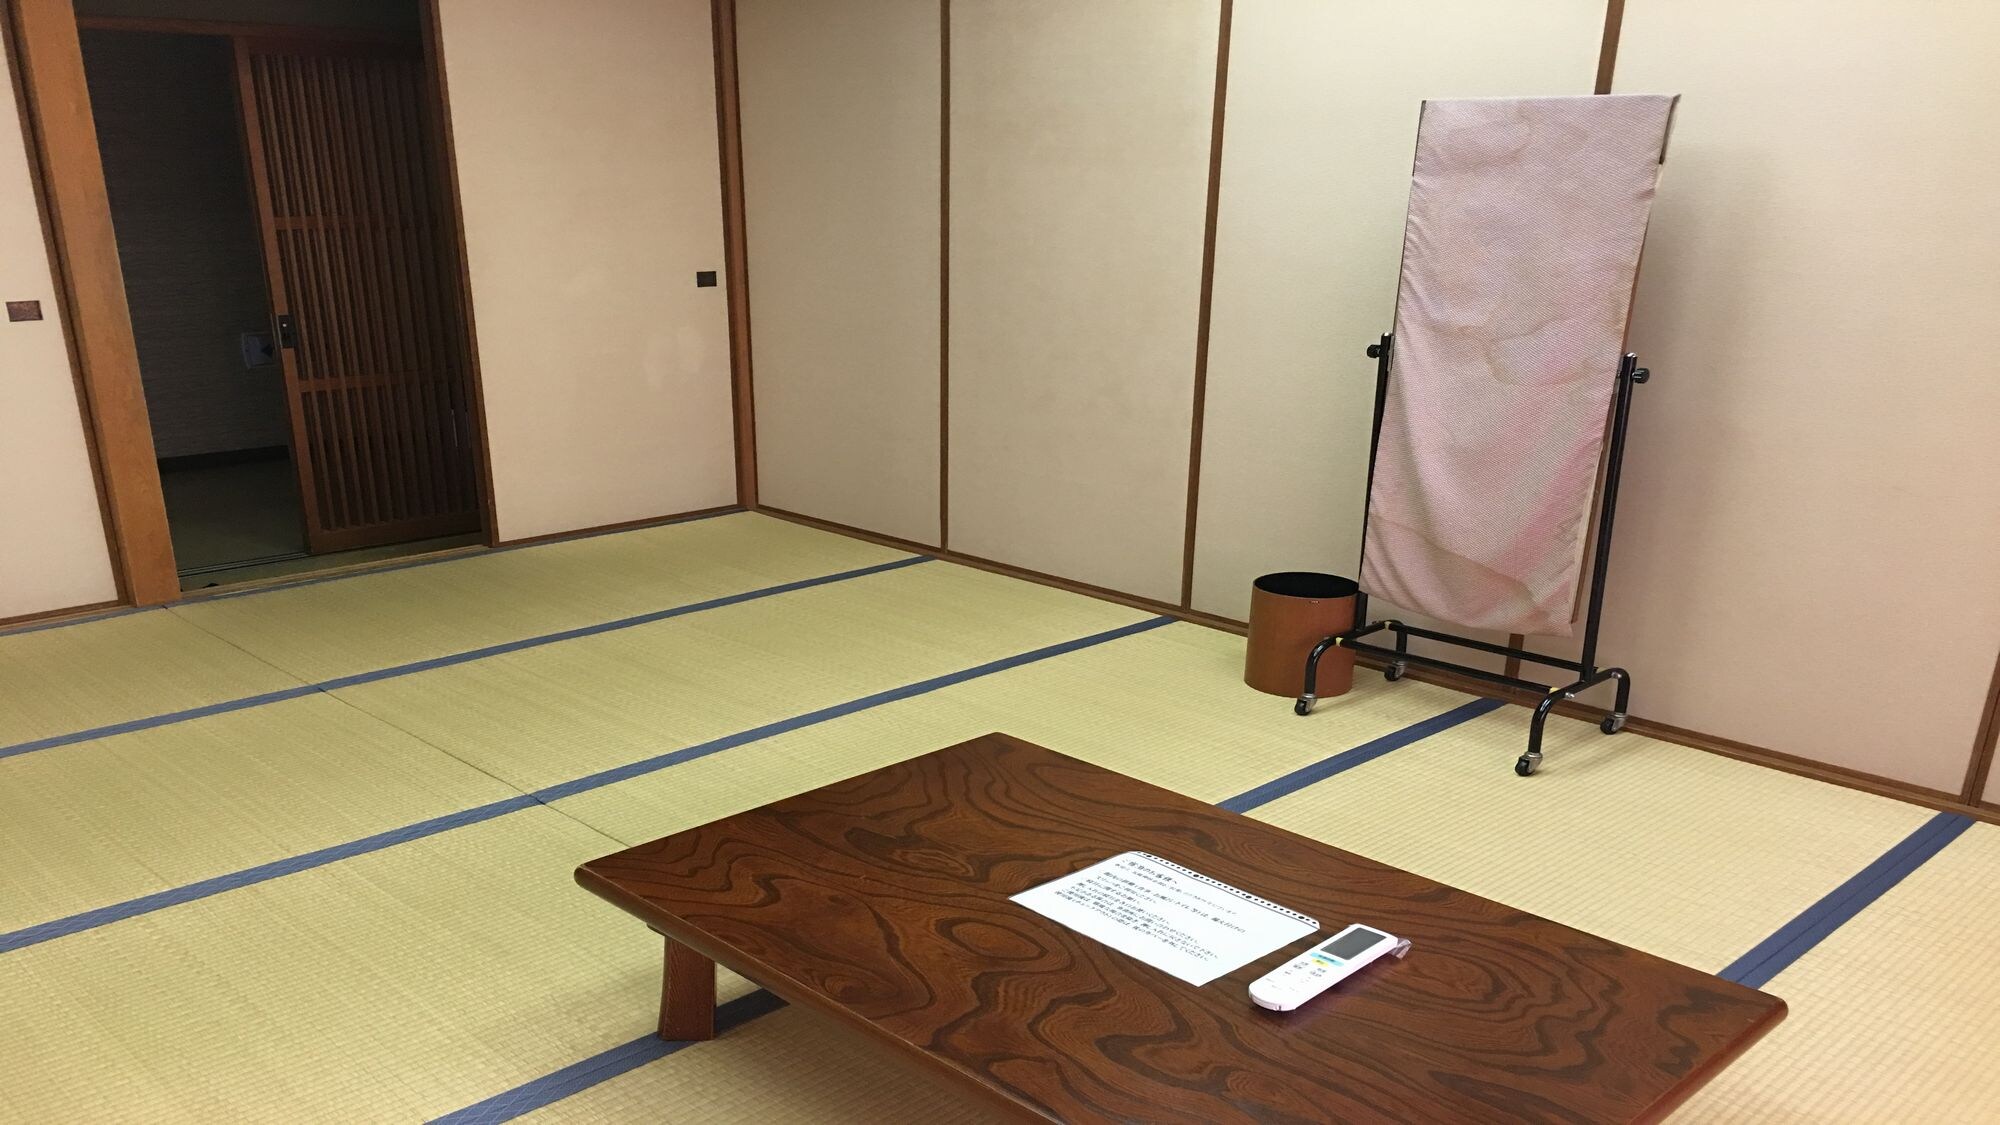 We will prepare a clean and well-cleaned Japanese-style room.